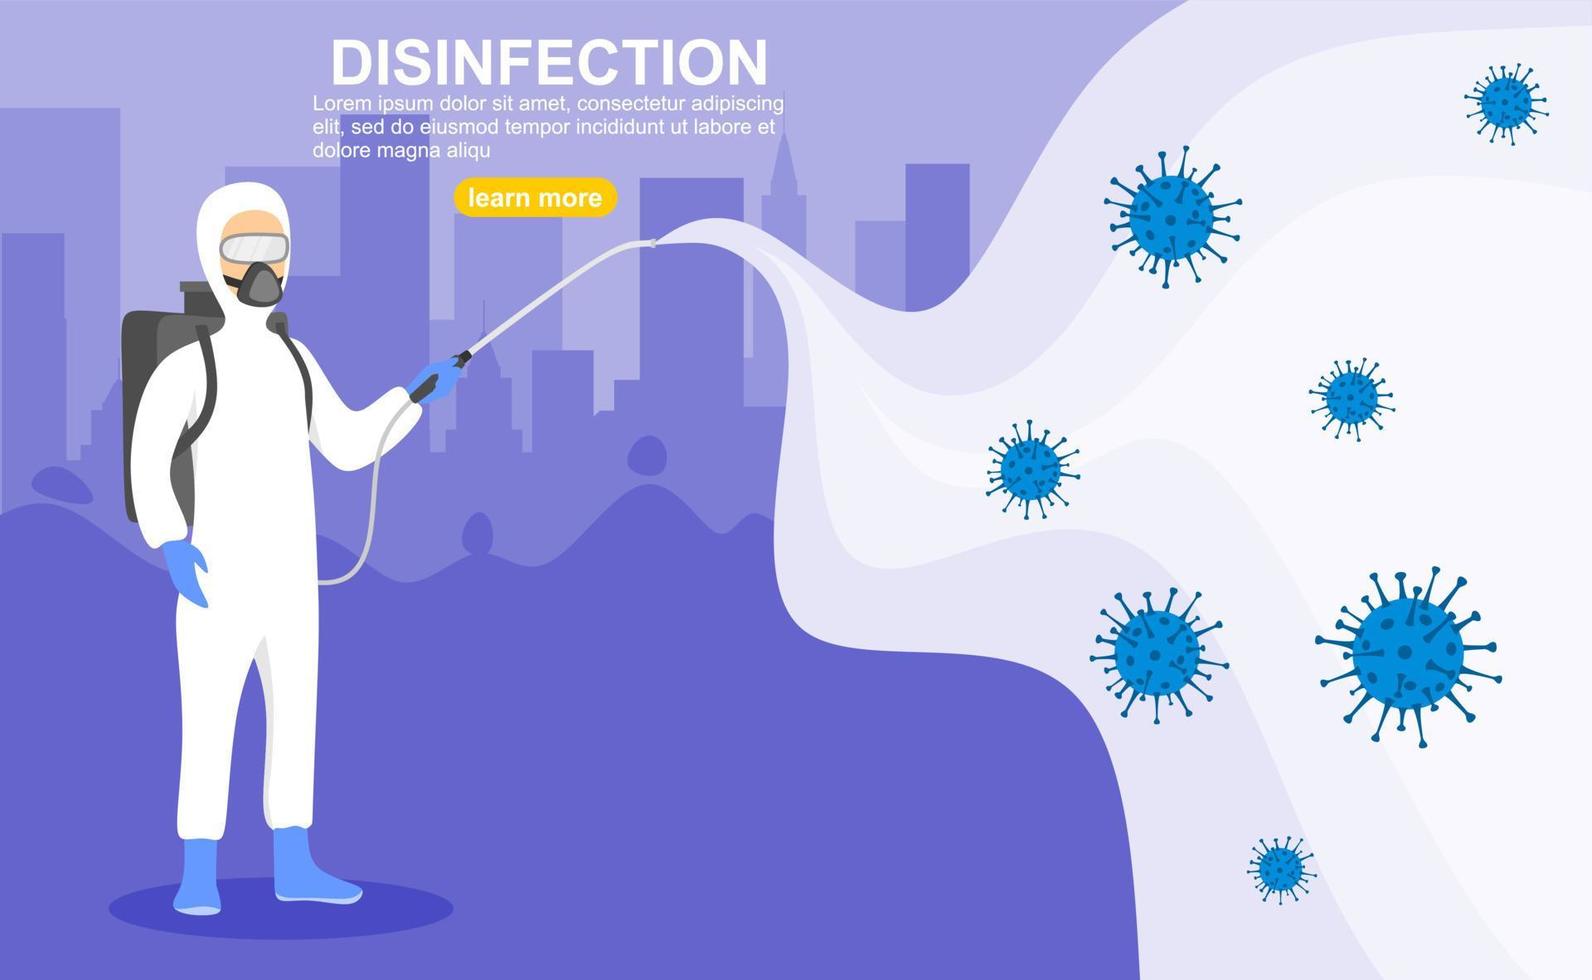 spraying disinfectant all over the place to avoid spreading virus. vector illustration